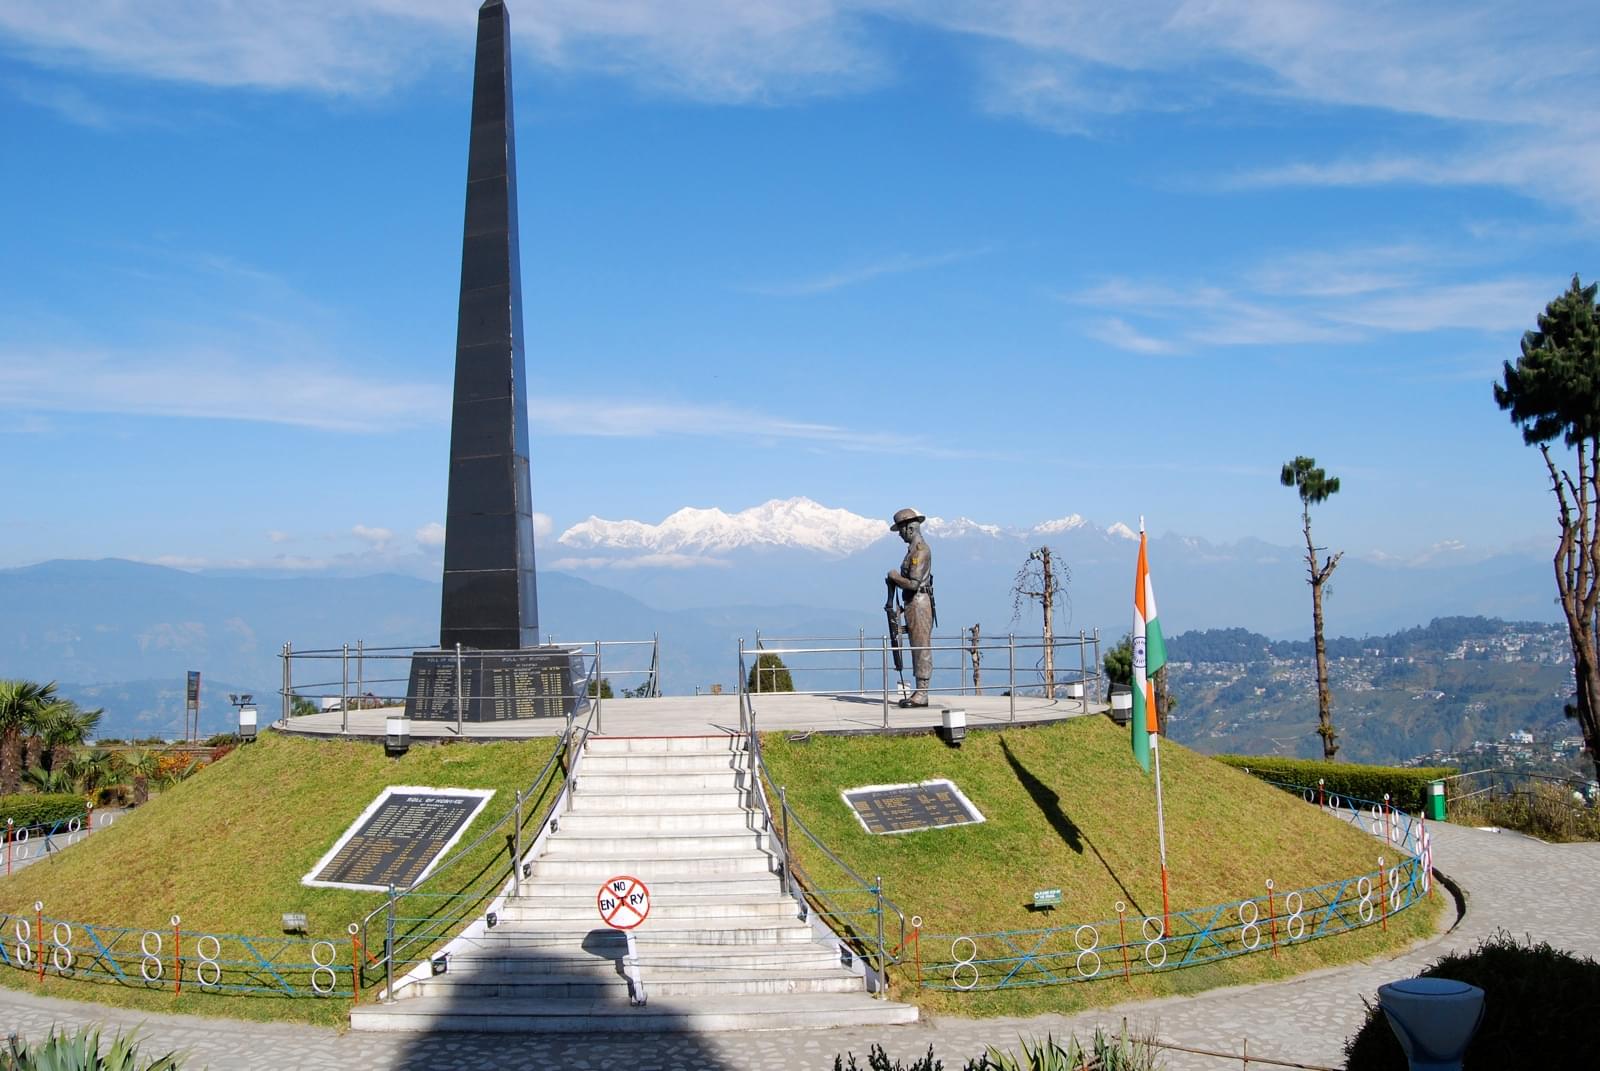 Pay your respects to the martyrs at the War Memorial